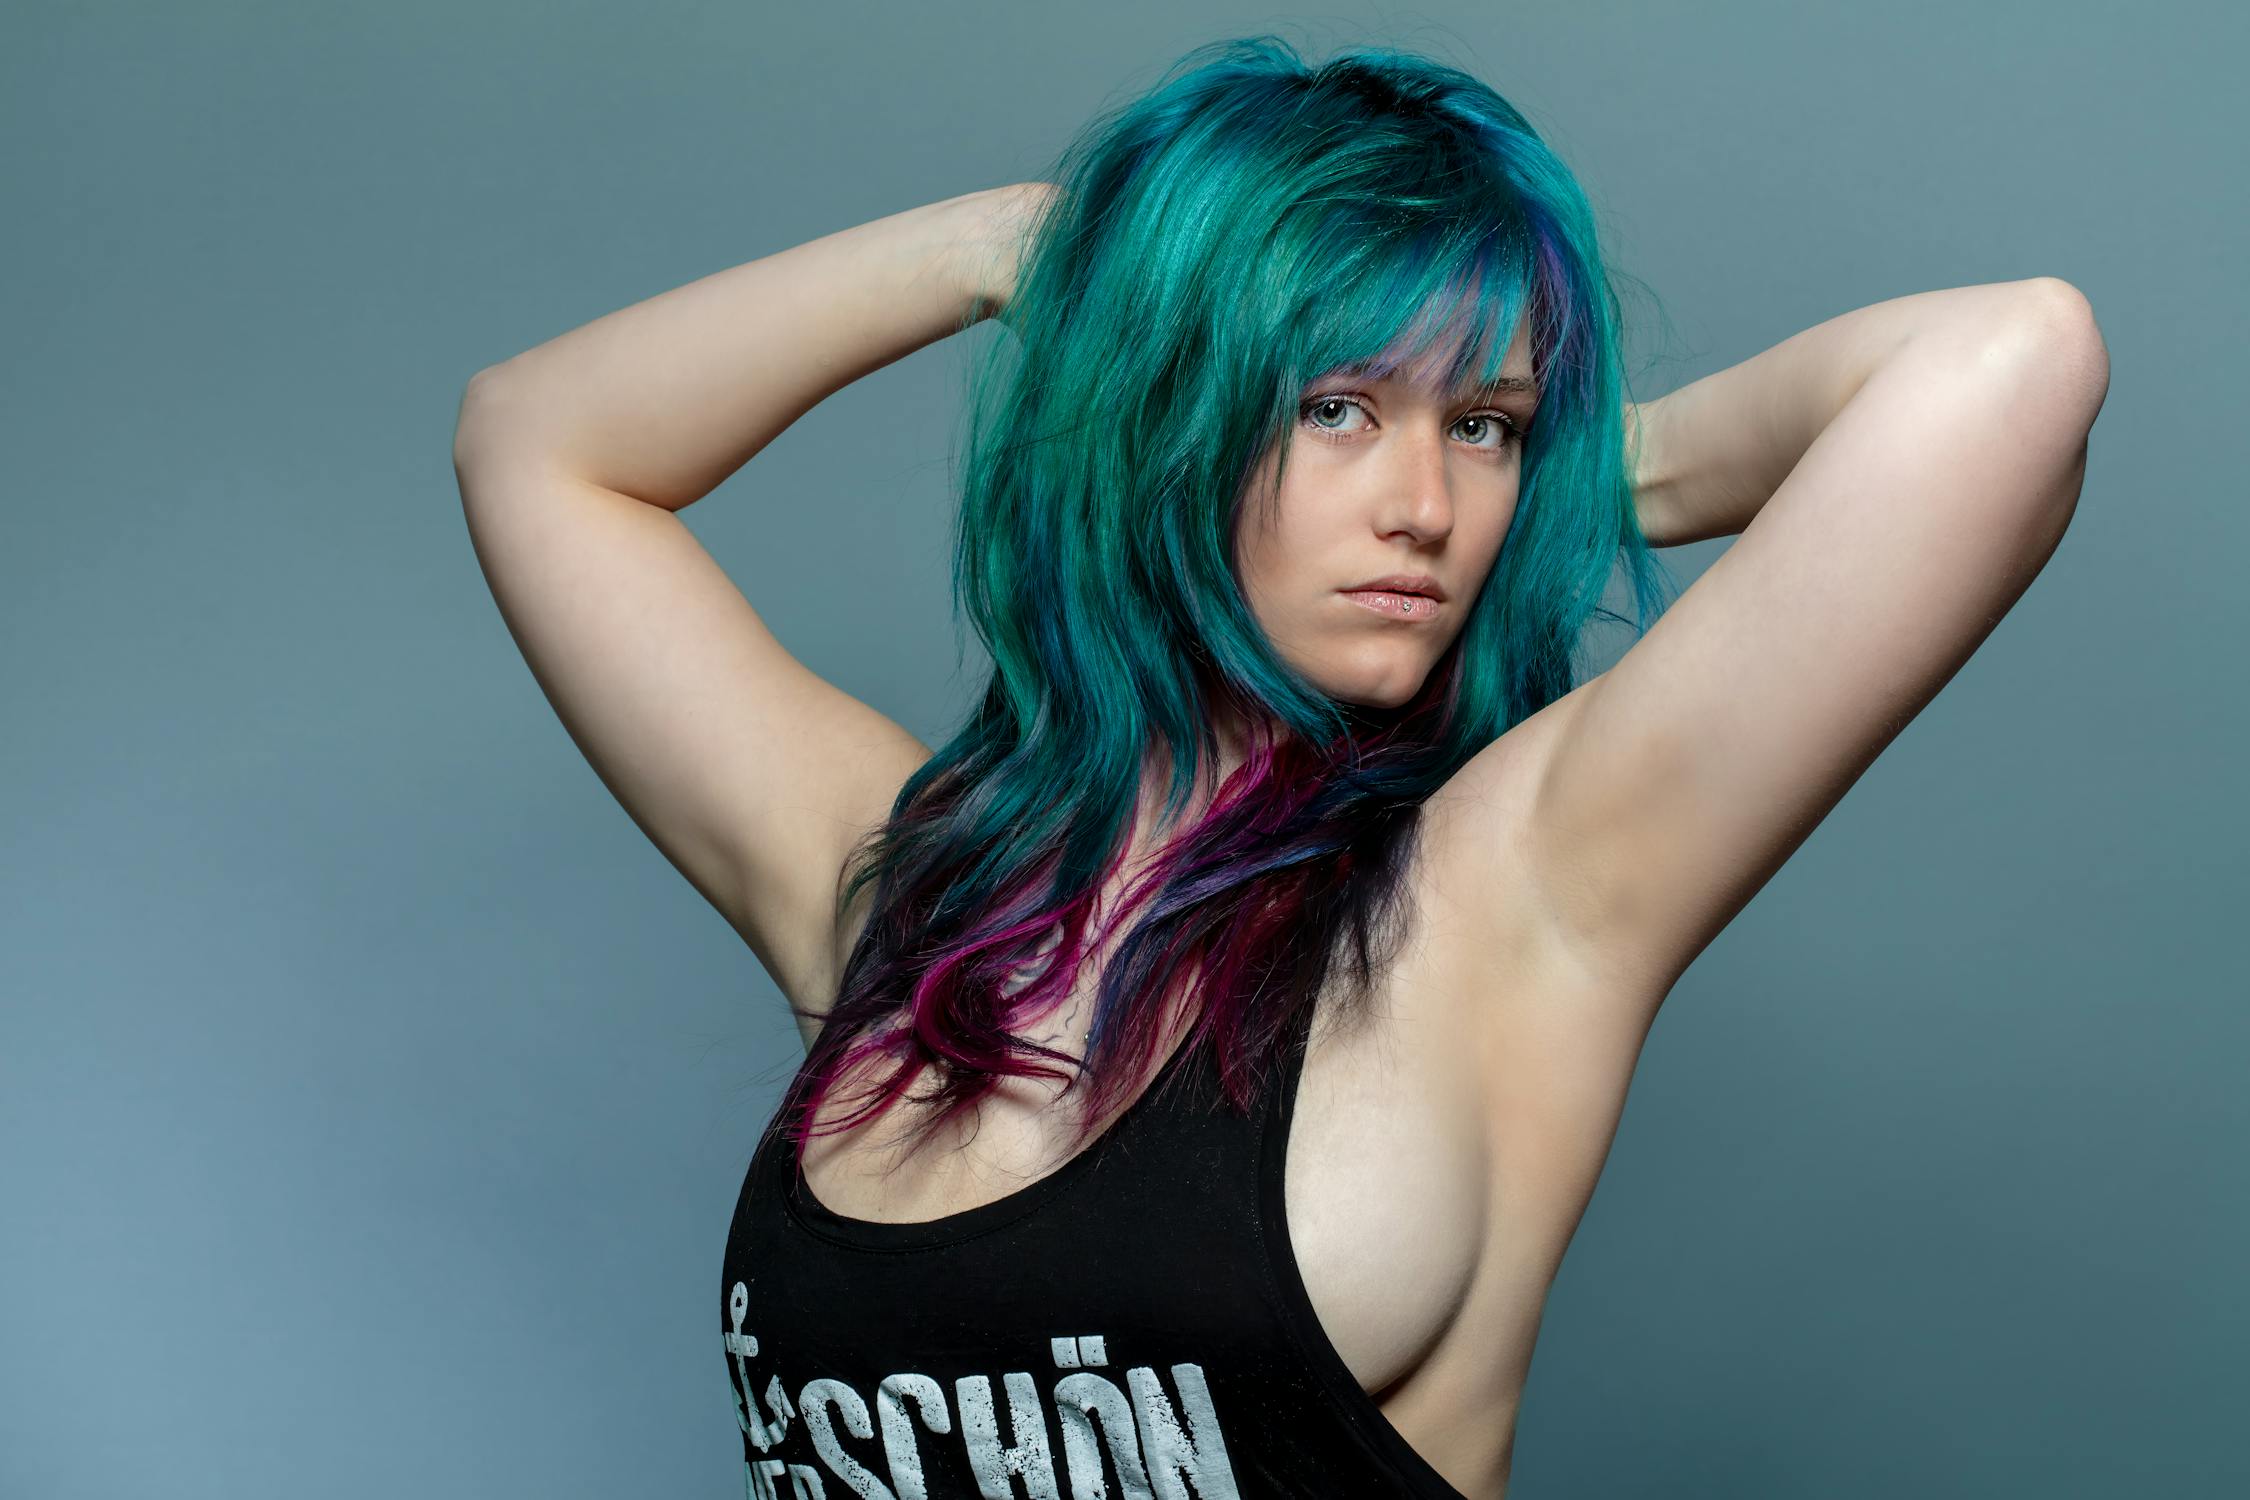 free-photo-of-woman-with-dyed-hair.jpeg?